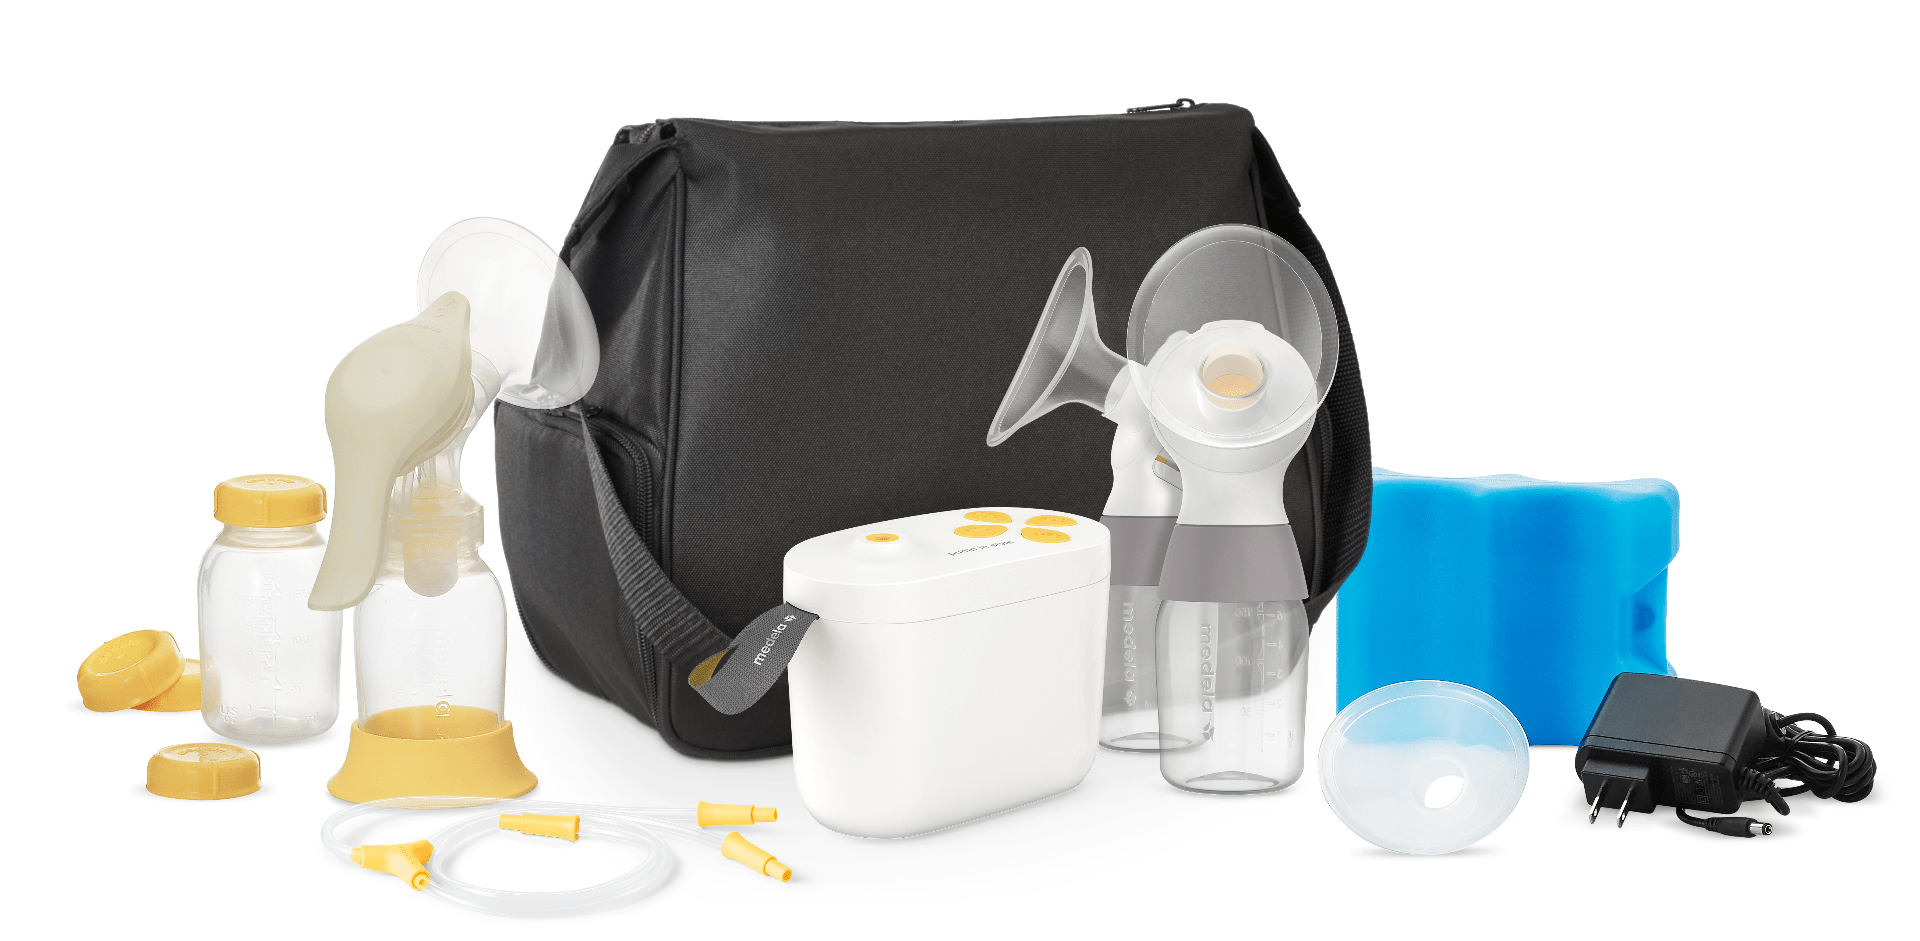 Unsponsored Comparison Review of the Medela Pump vs. Spectra vs. the Willow  — Fairly Curated